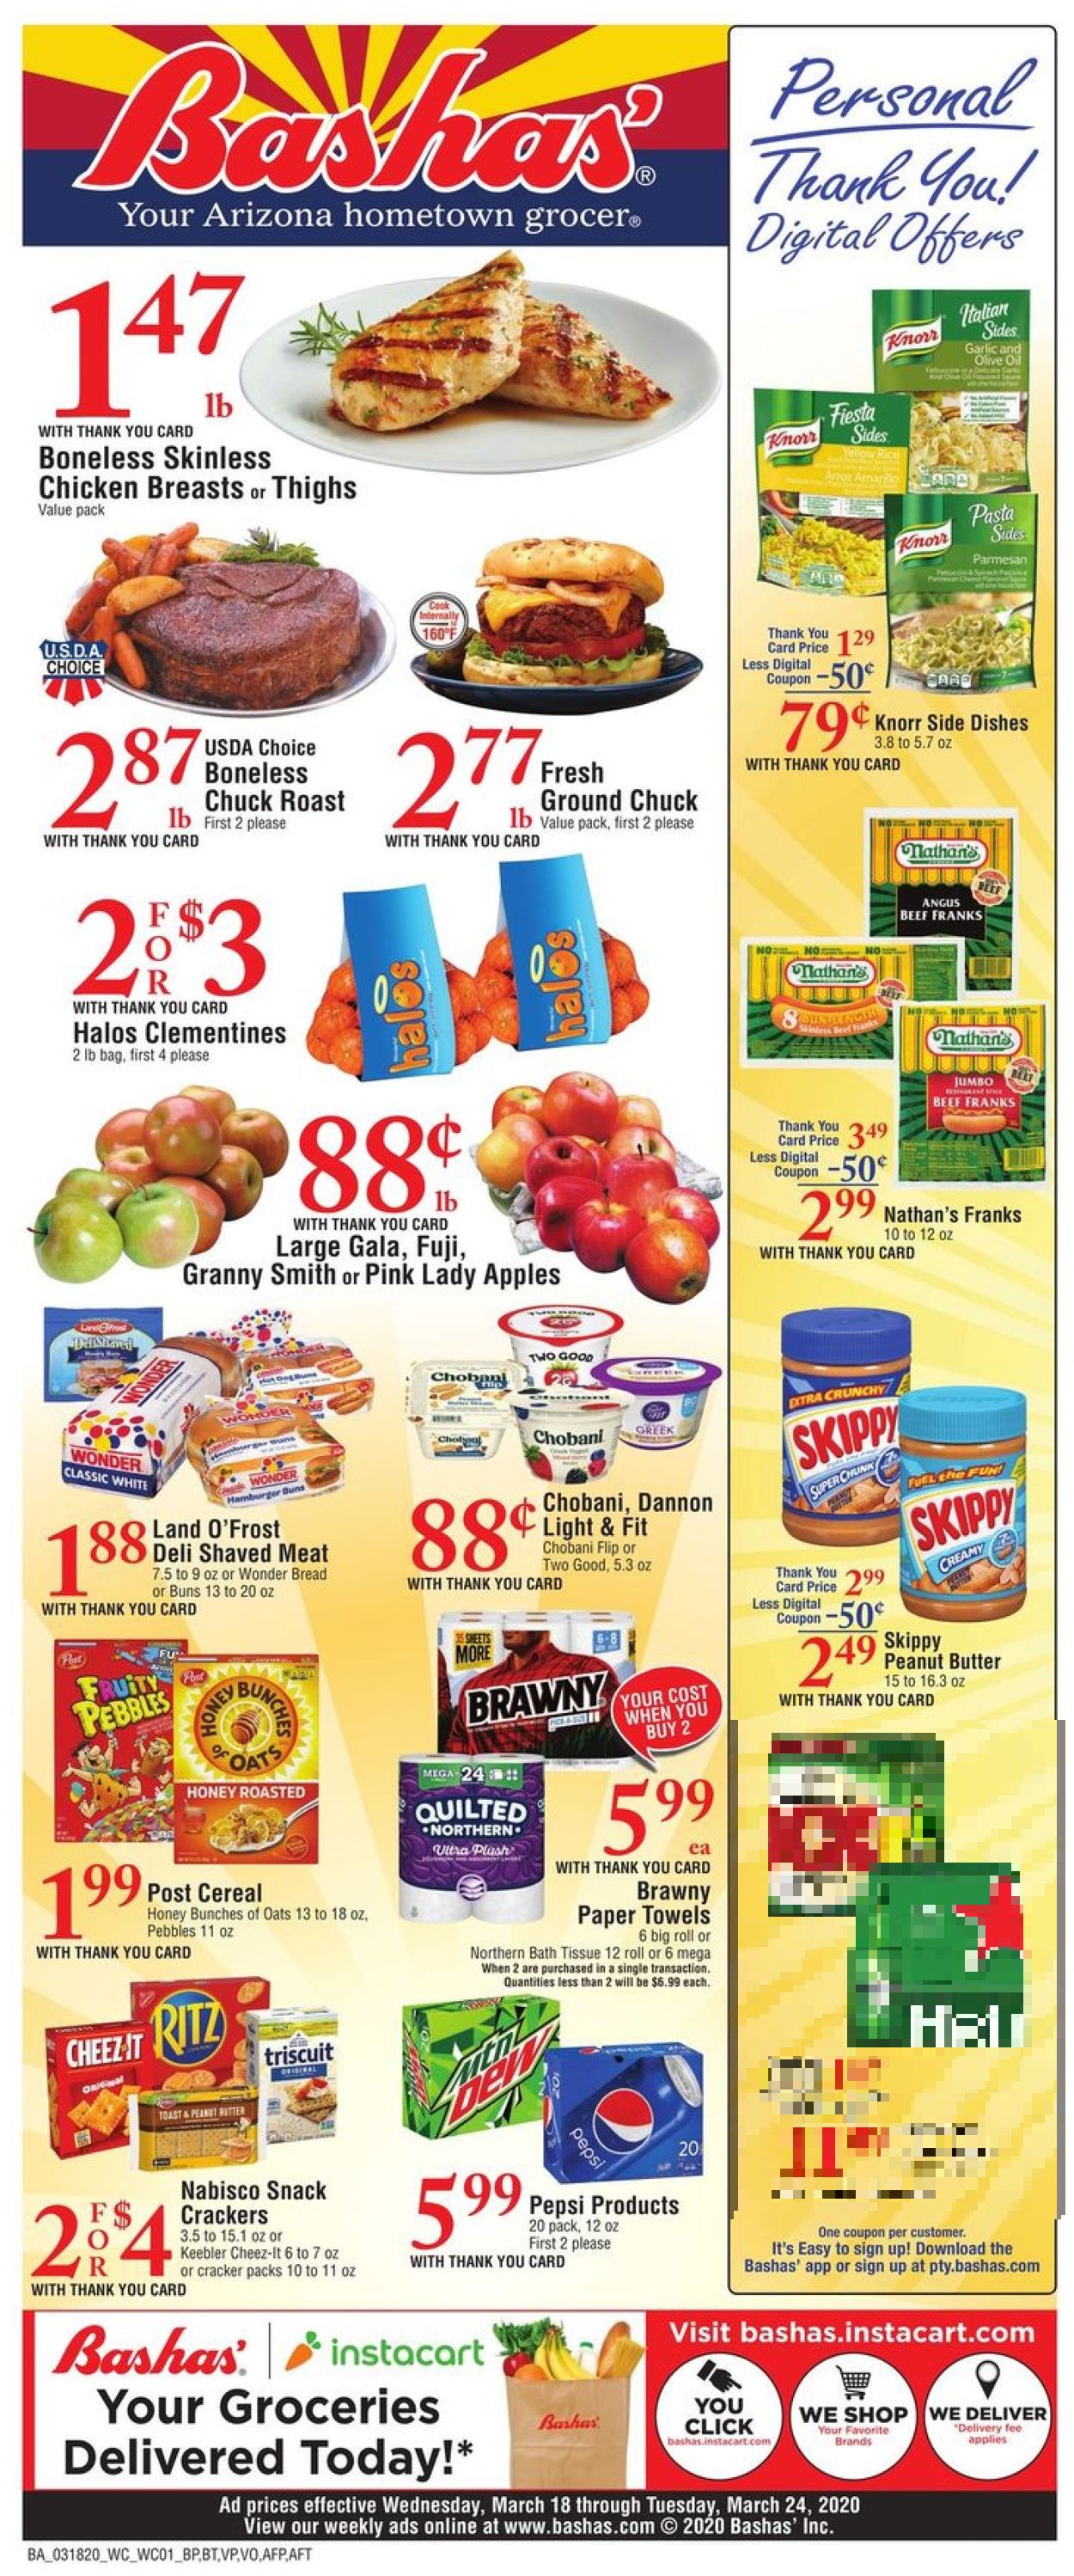 Bashas Current weekly ad 03/18 - 03/24/2020 - frequent-ads.com